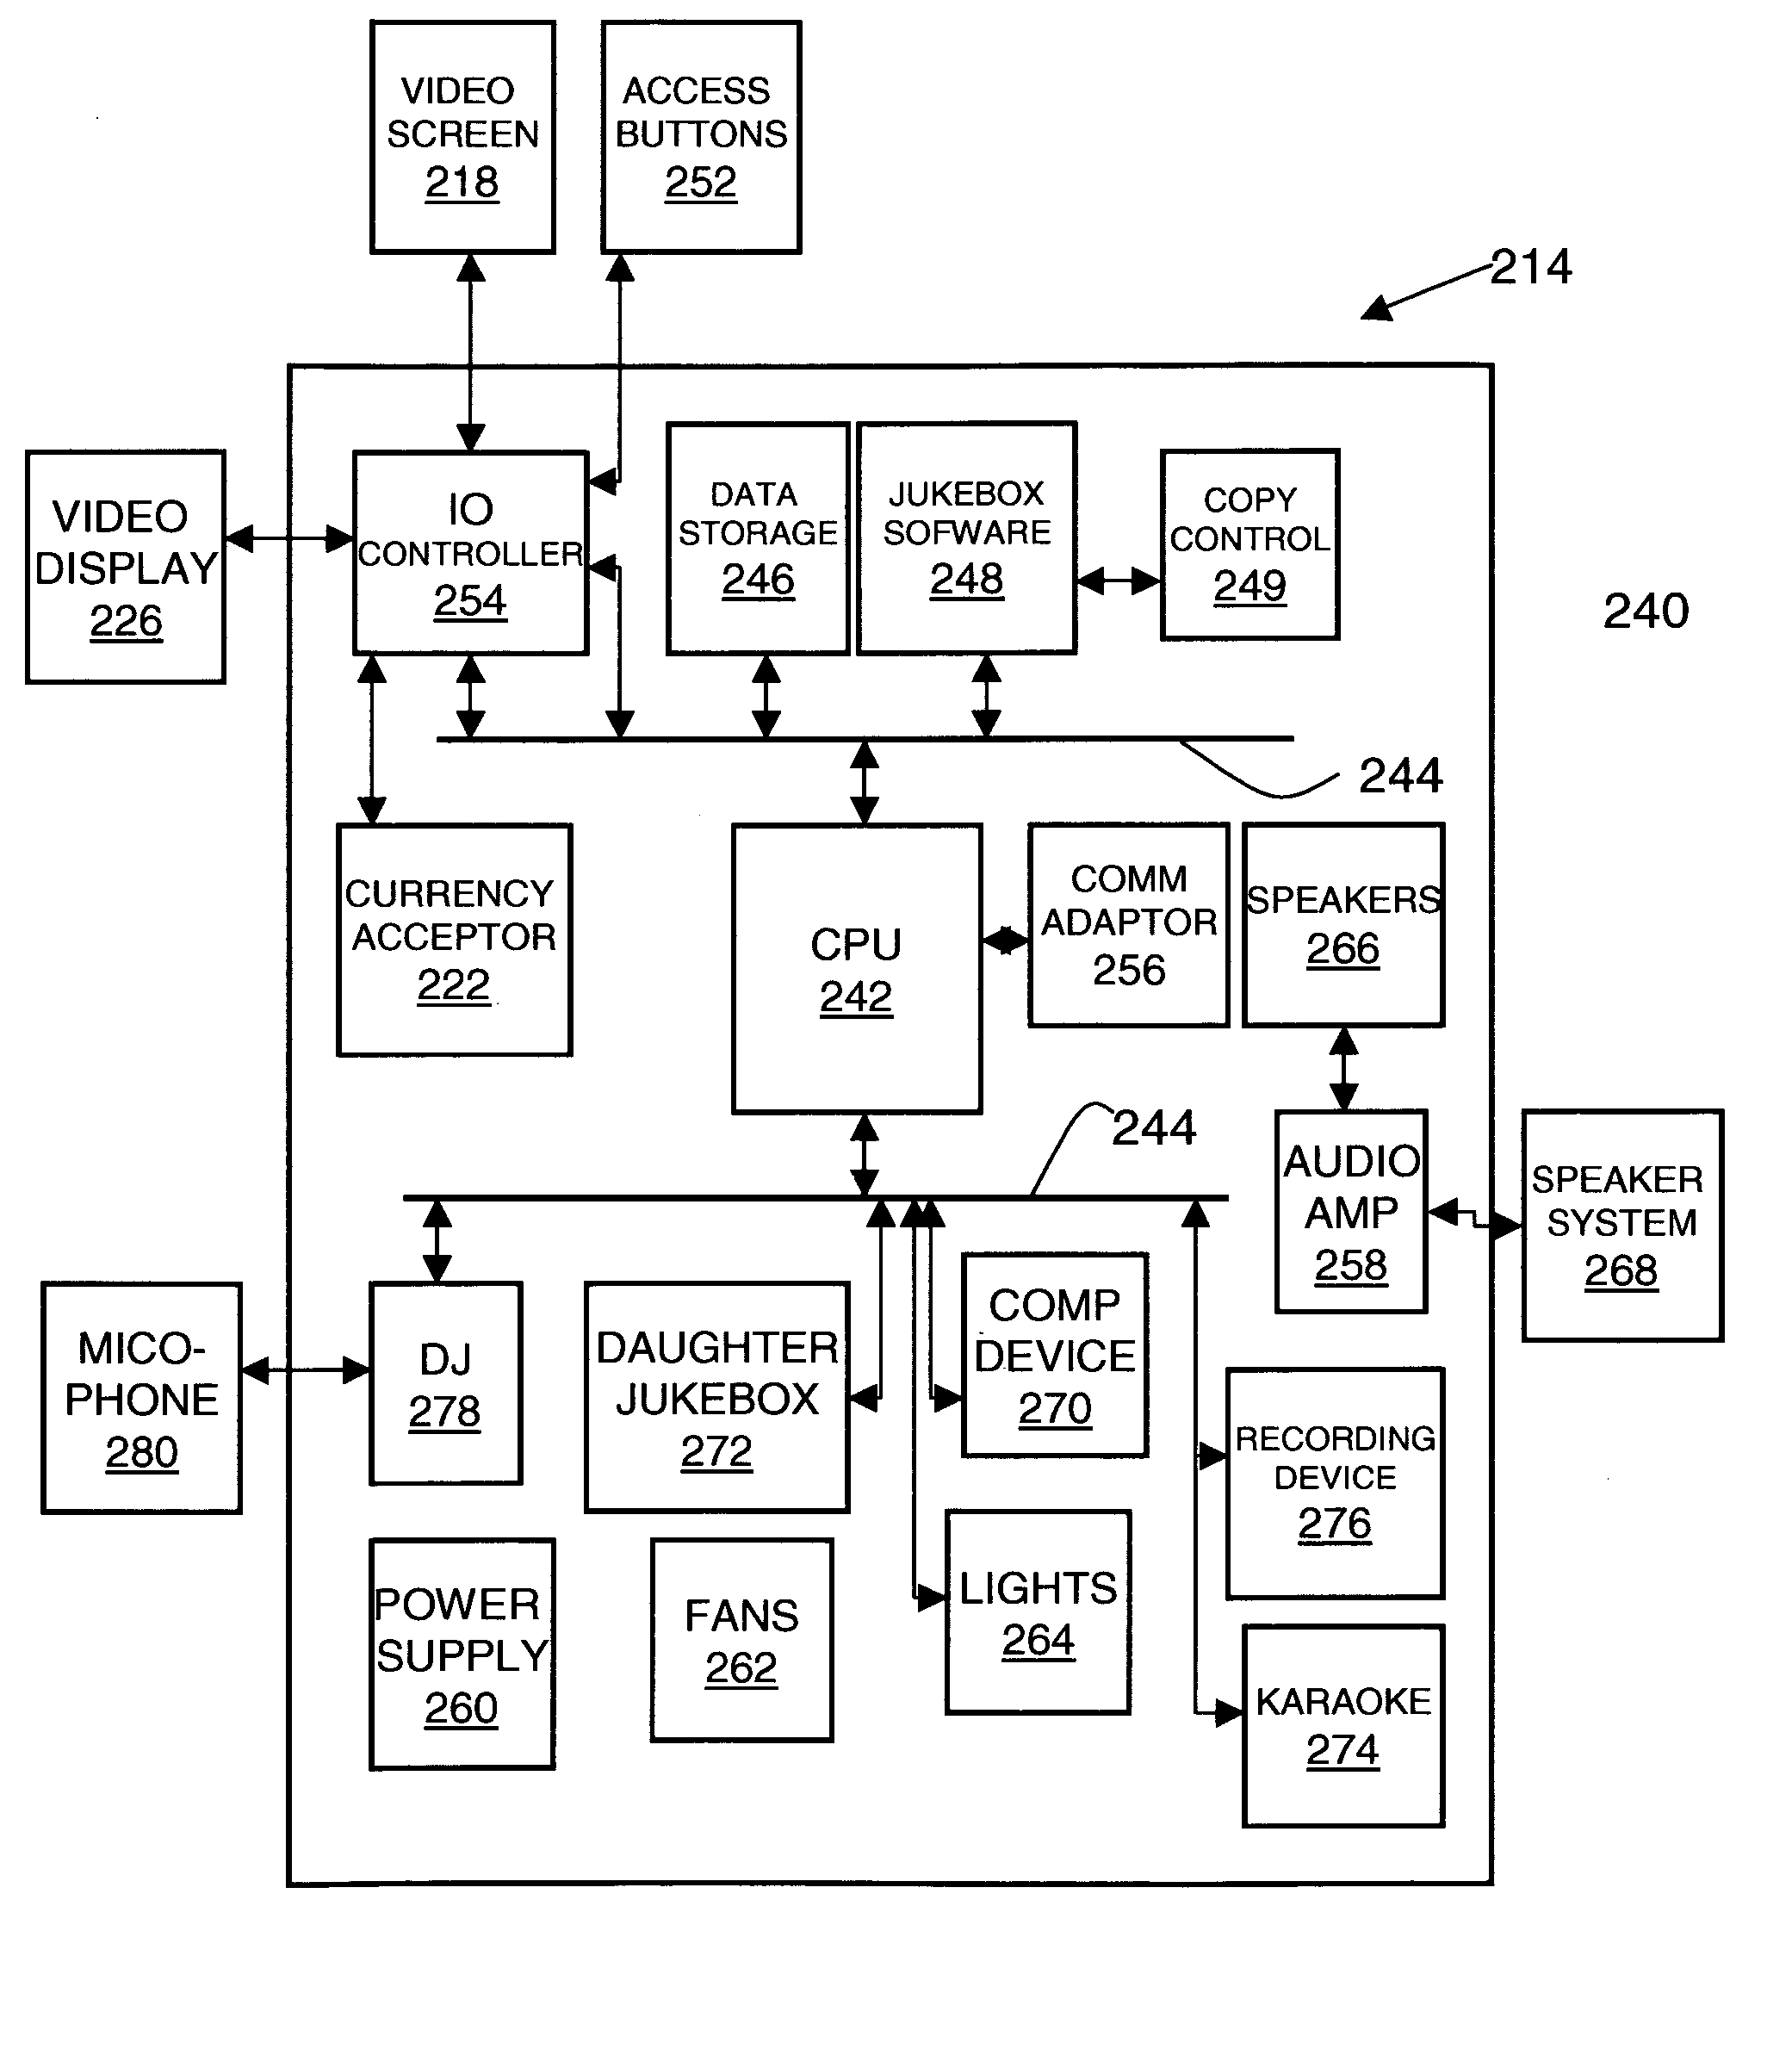 Video jukebox apparatus and a method of playing music and music videos using a video jukebox appartus